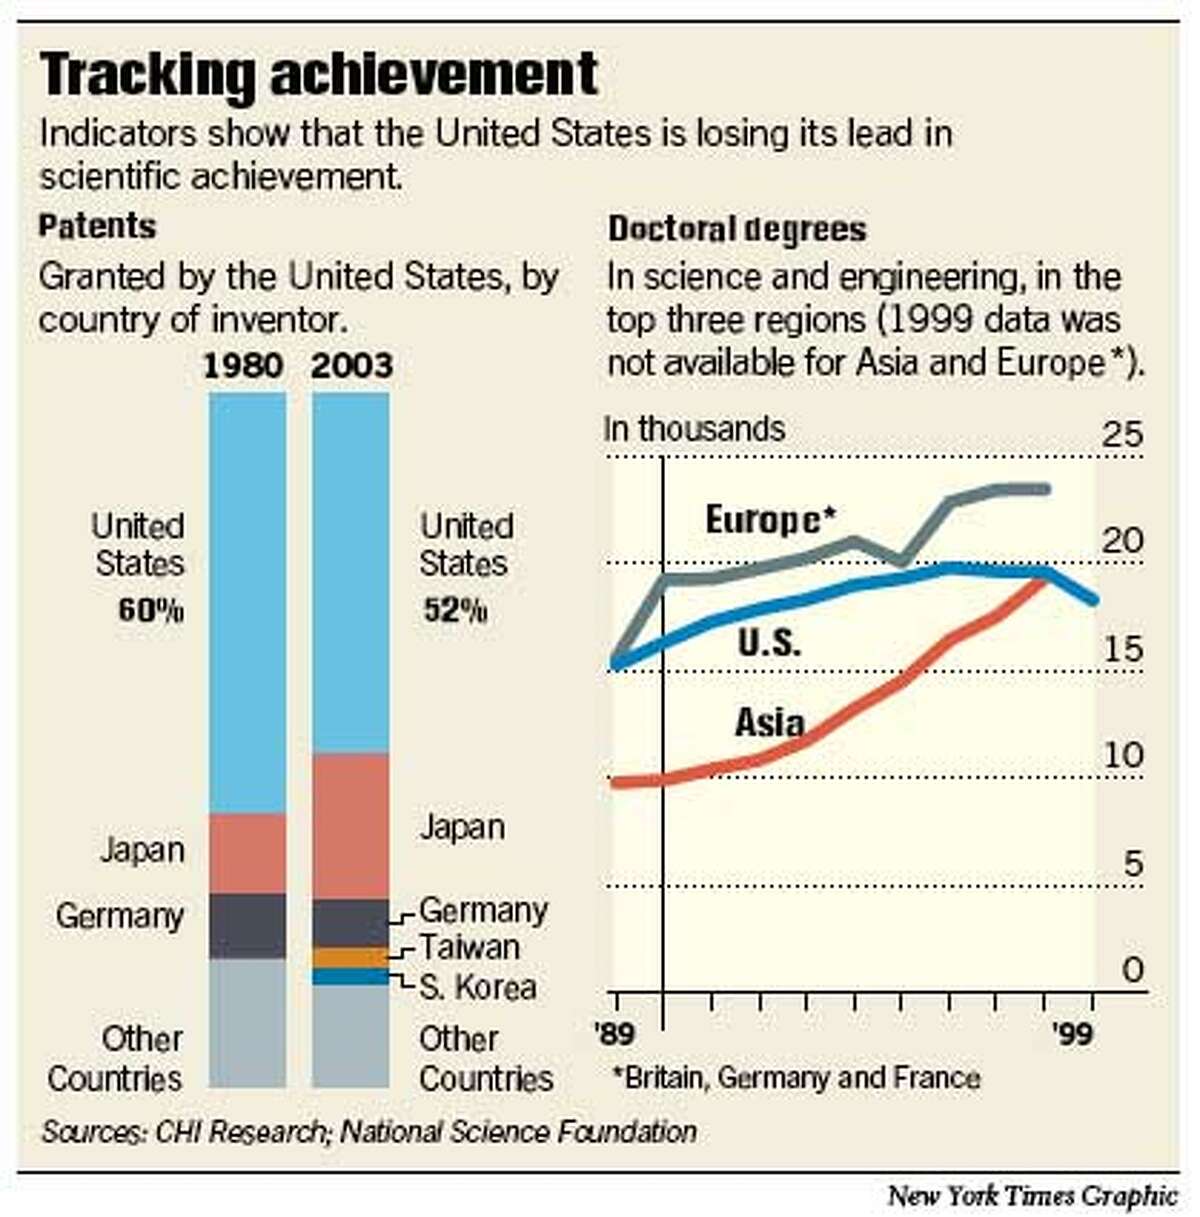 Tracking Achievement. New York Times Graphic